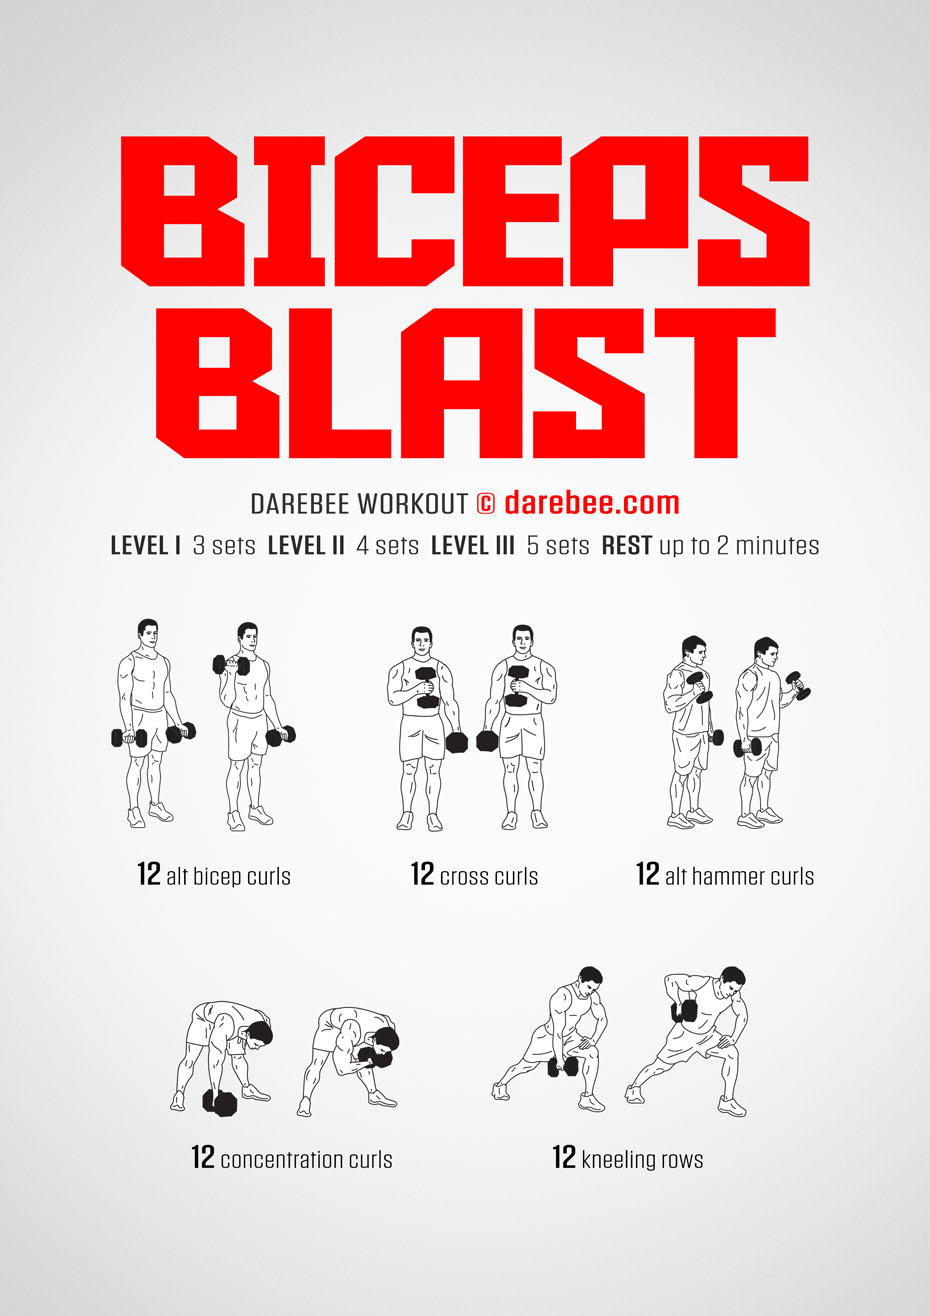 Biceps Blast is a Darebee home-fitness dumbbell workout for the biceps that helps you build real upper body strength. 